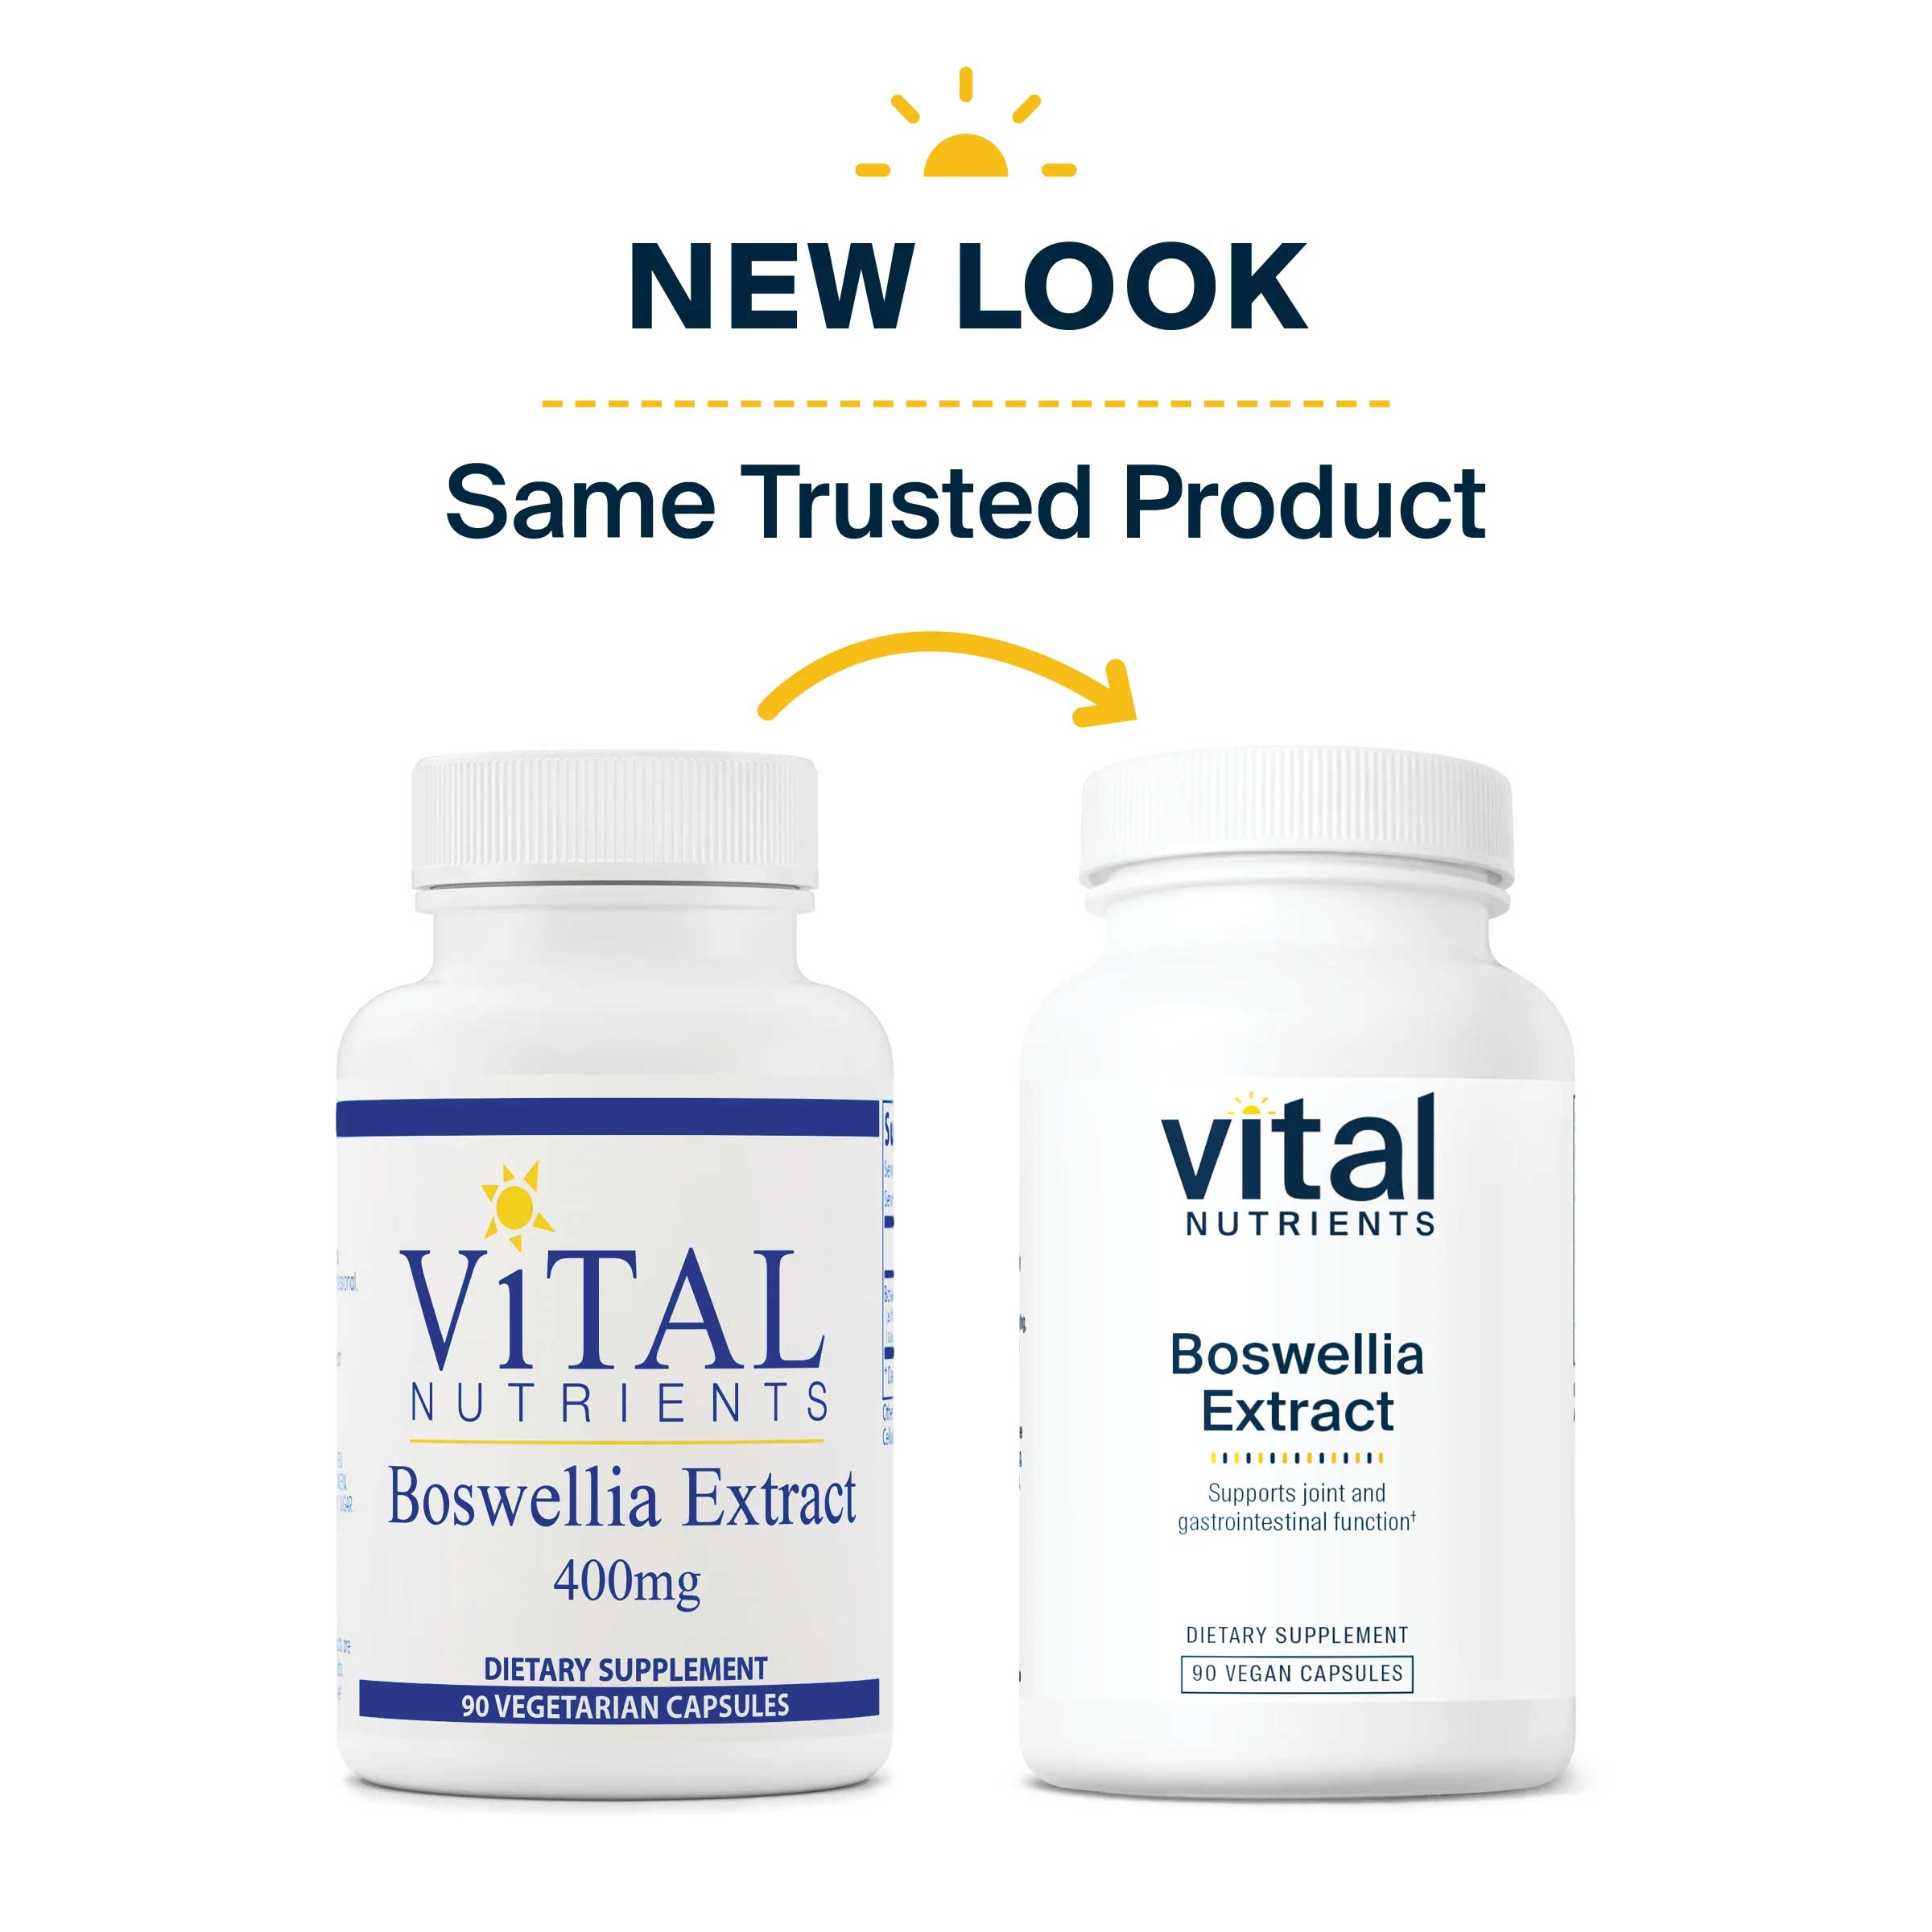 Vital Nutrients Boswellia Extract 400mg New Look